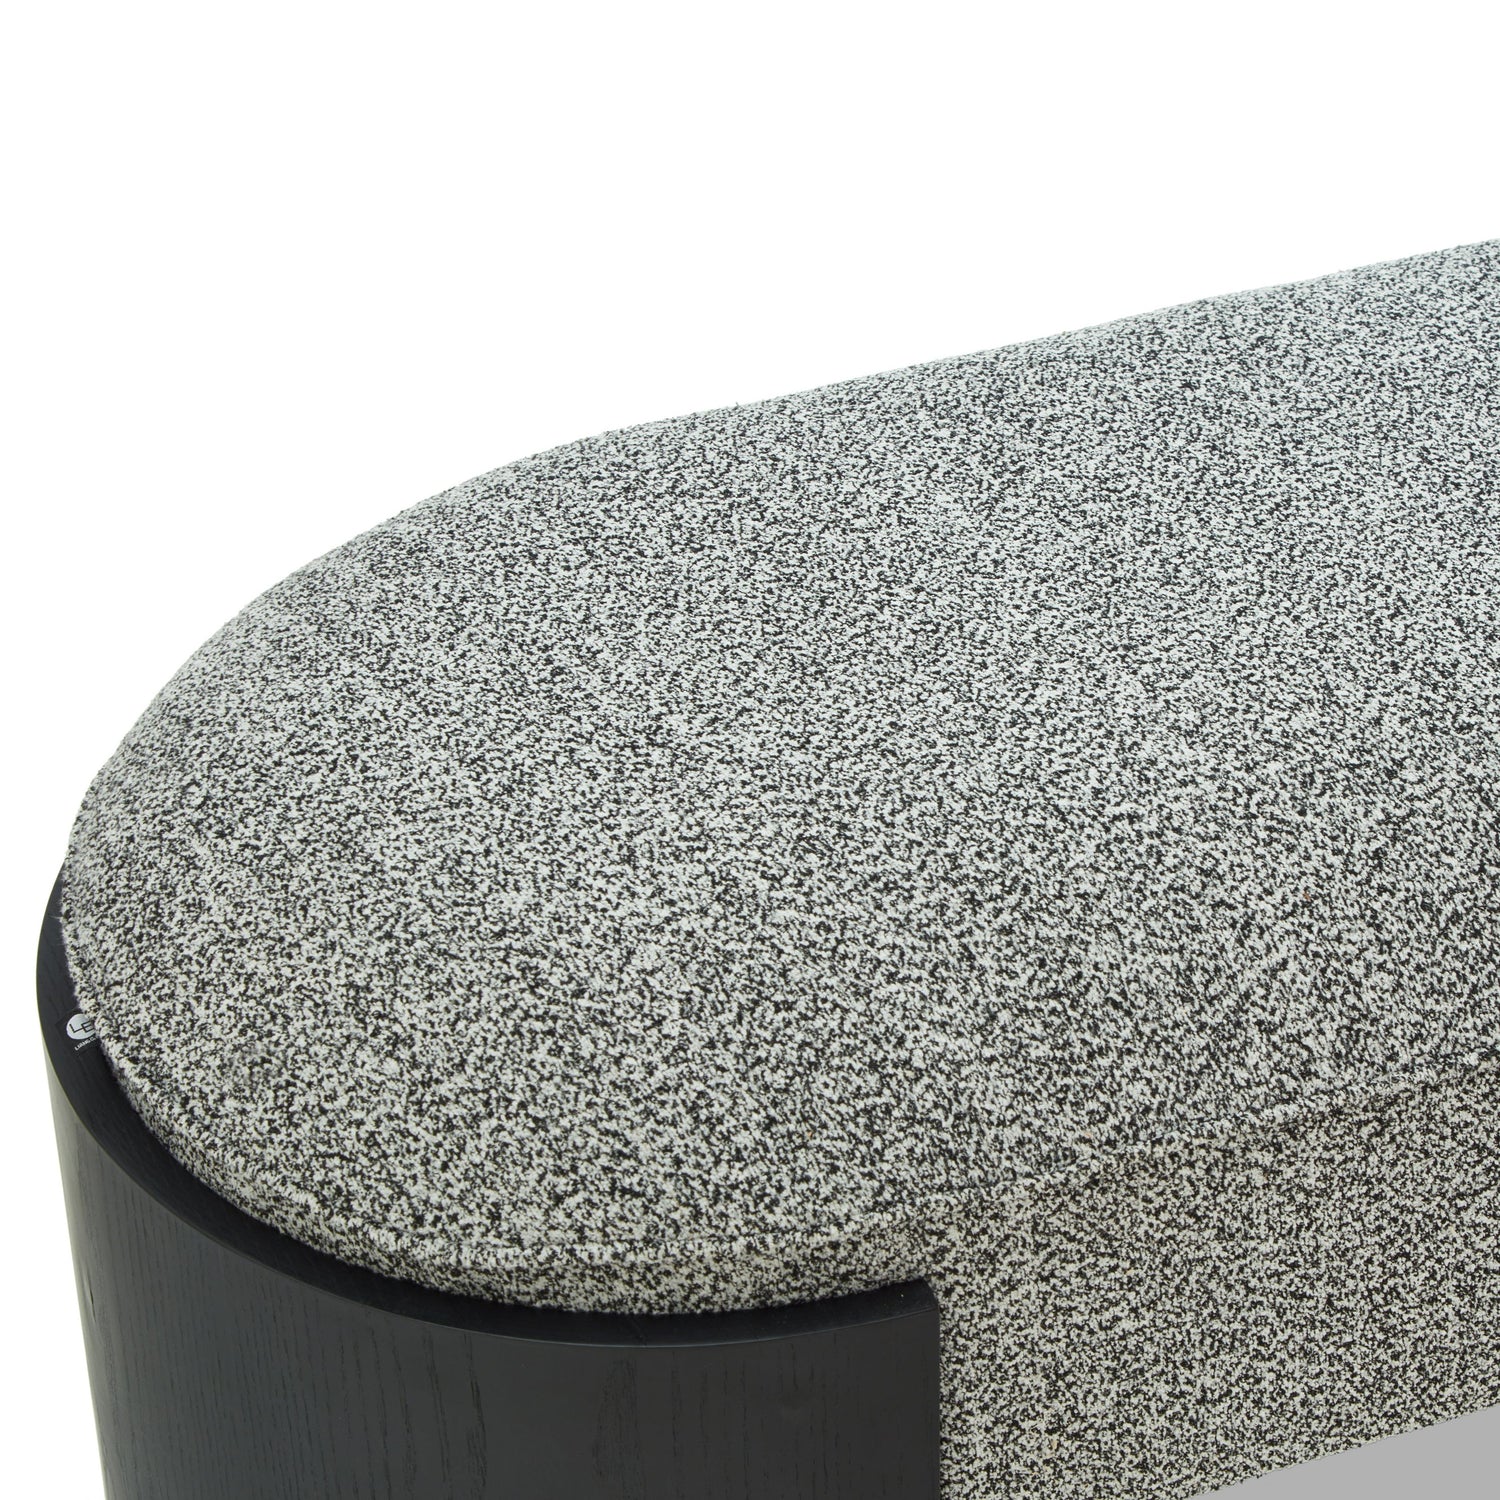  LiangAndEimil-Liang & Eimil Ed Long Bench in Cordoba Speckle Grey-Grey 773 